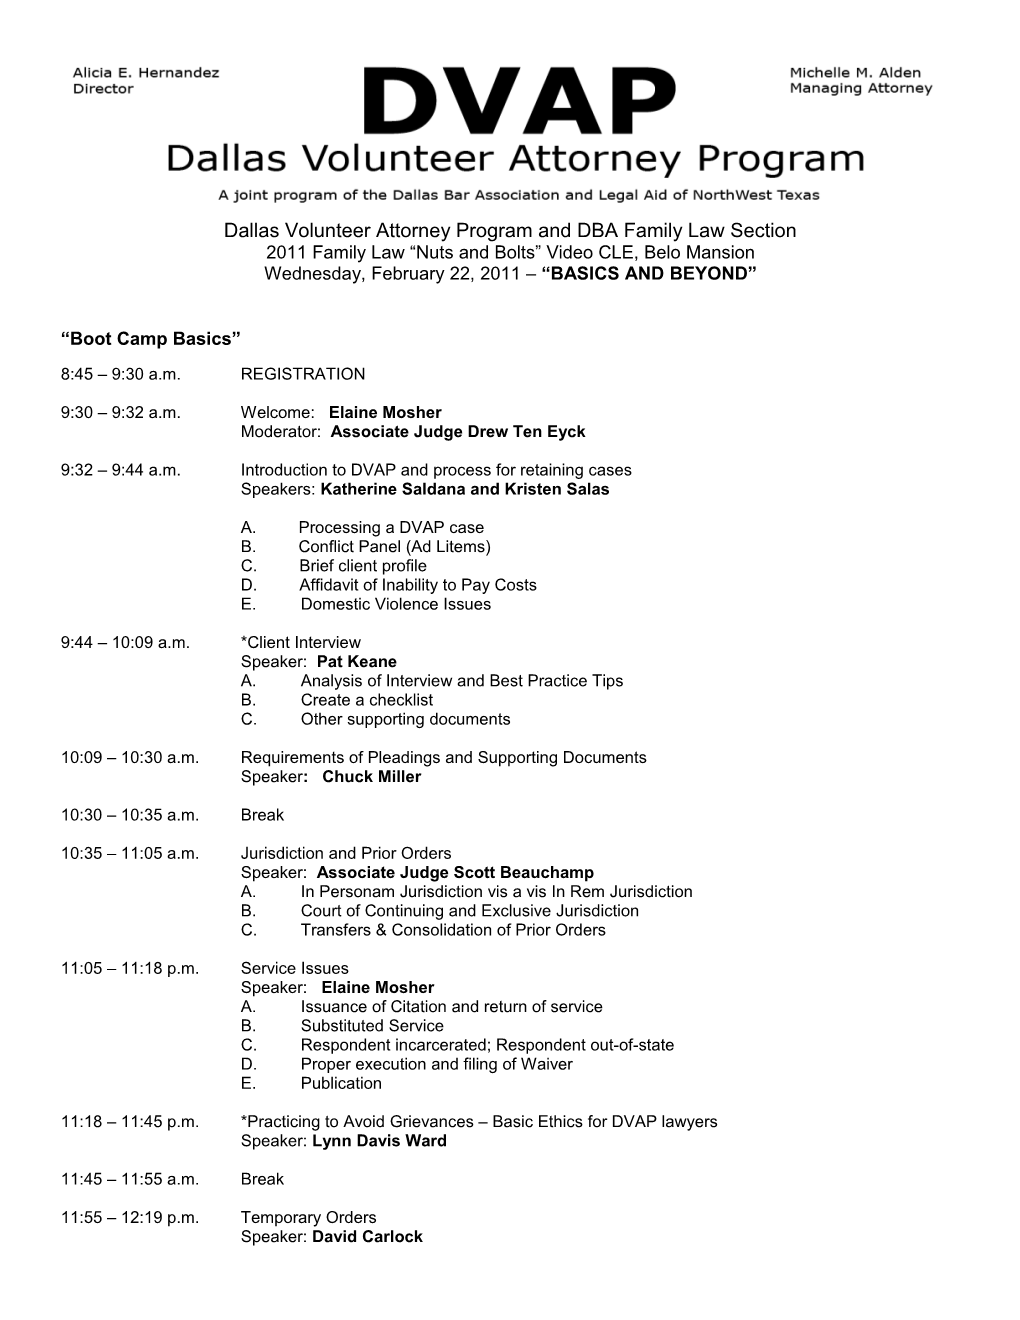 Dallas Volunteer Attorney Program and Family Law Section